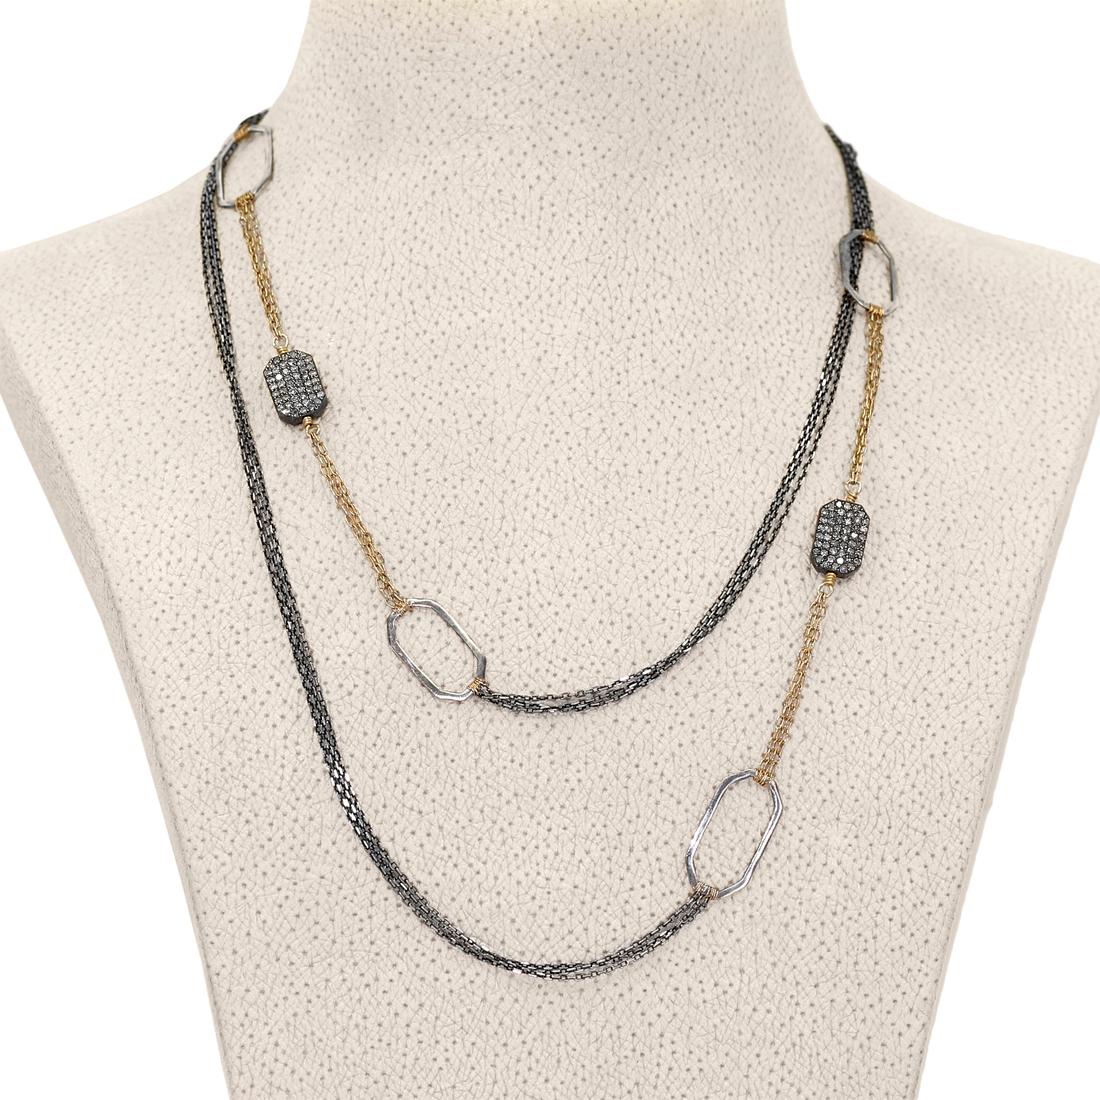 Wear it long, doubled, or as a lariat! One of a Kind Necklace handmade by award-winning jewelry designer Dana Kellin, featuring two octagonal, double-sided, shimmering  pave diamond elements set in oxidized sterling silver that connect to 14k yellow